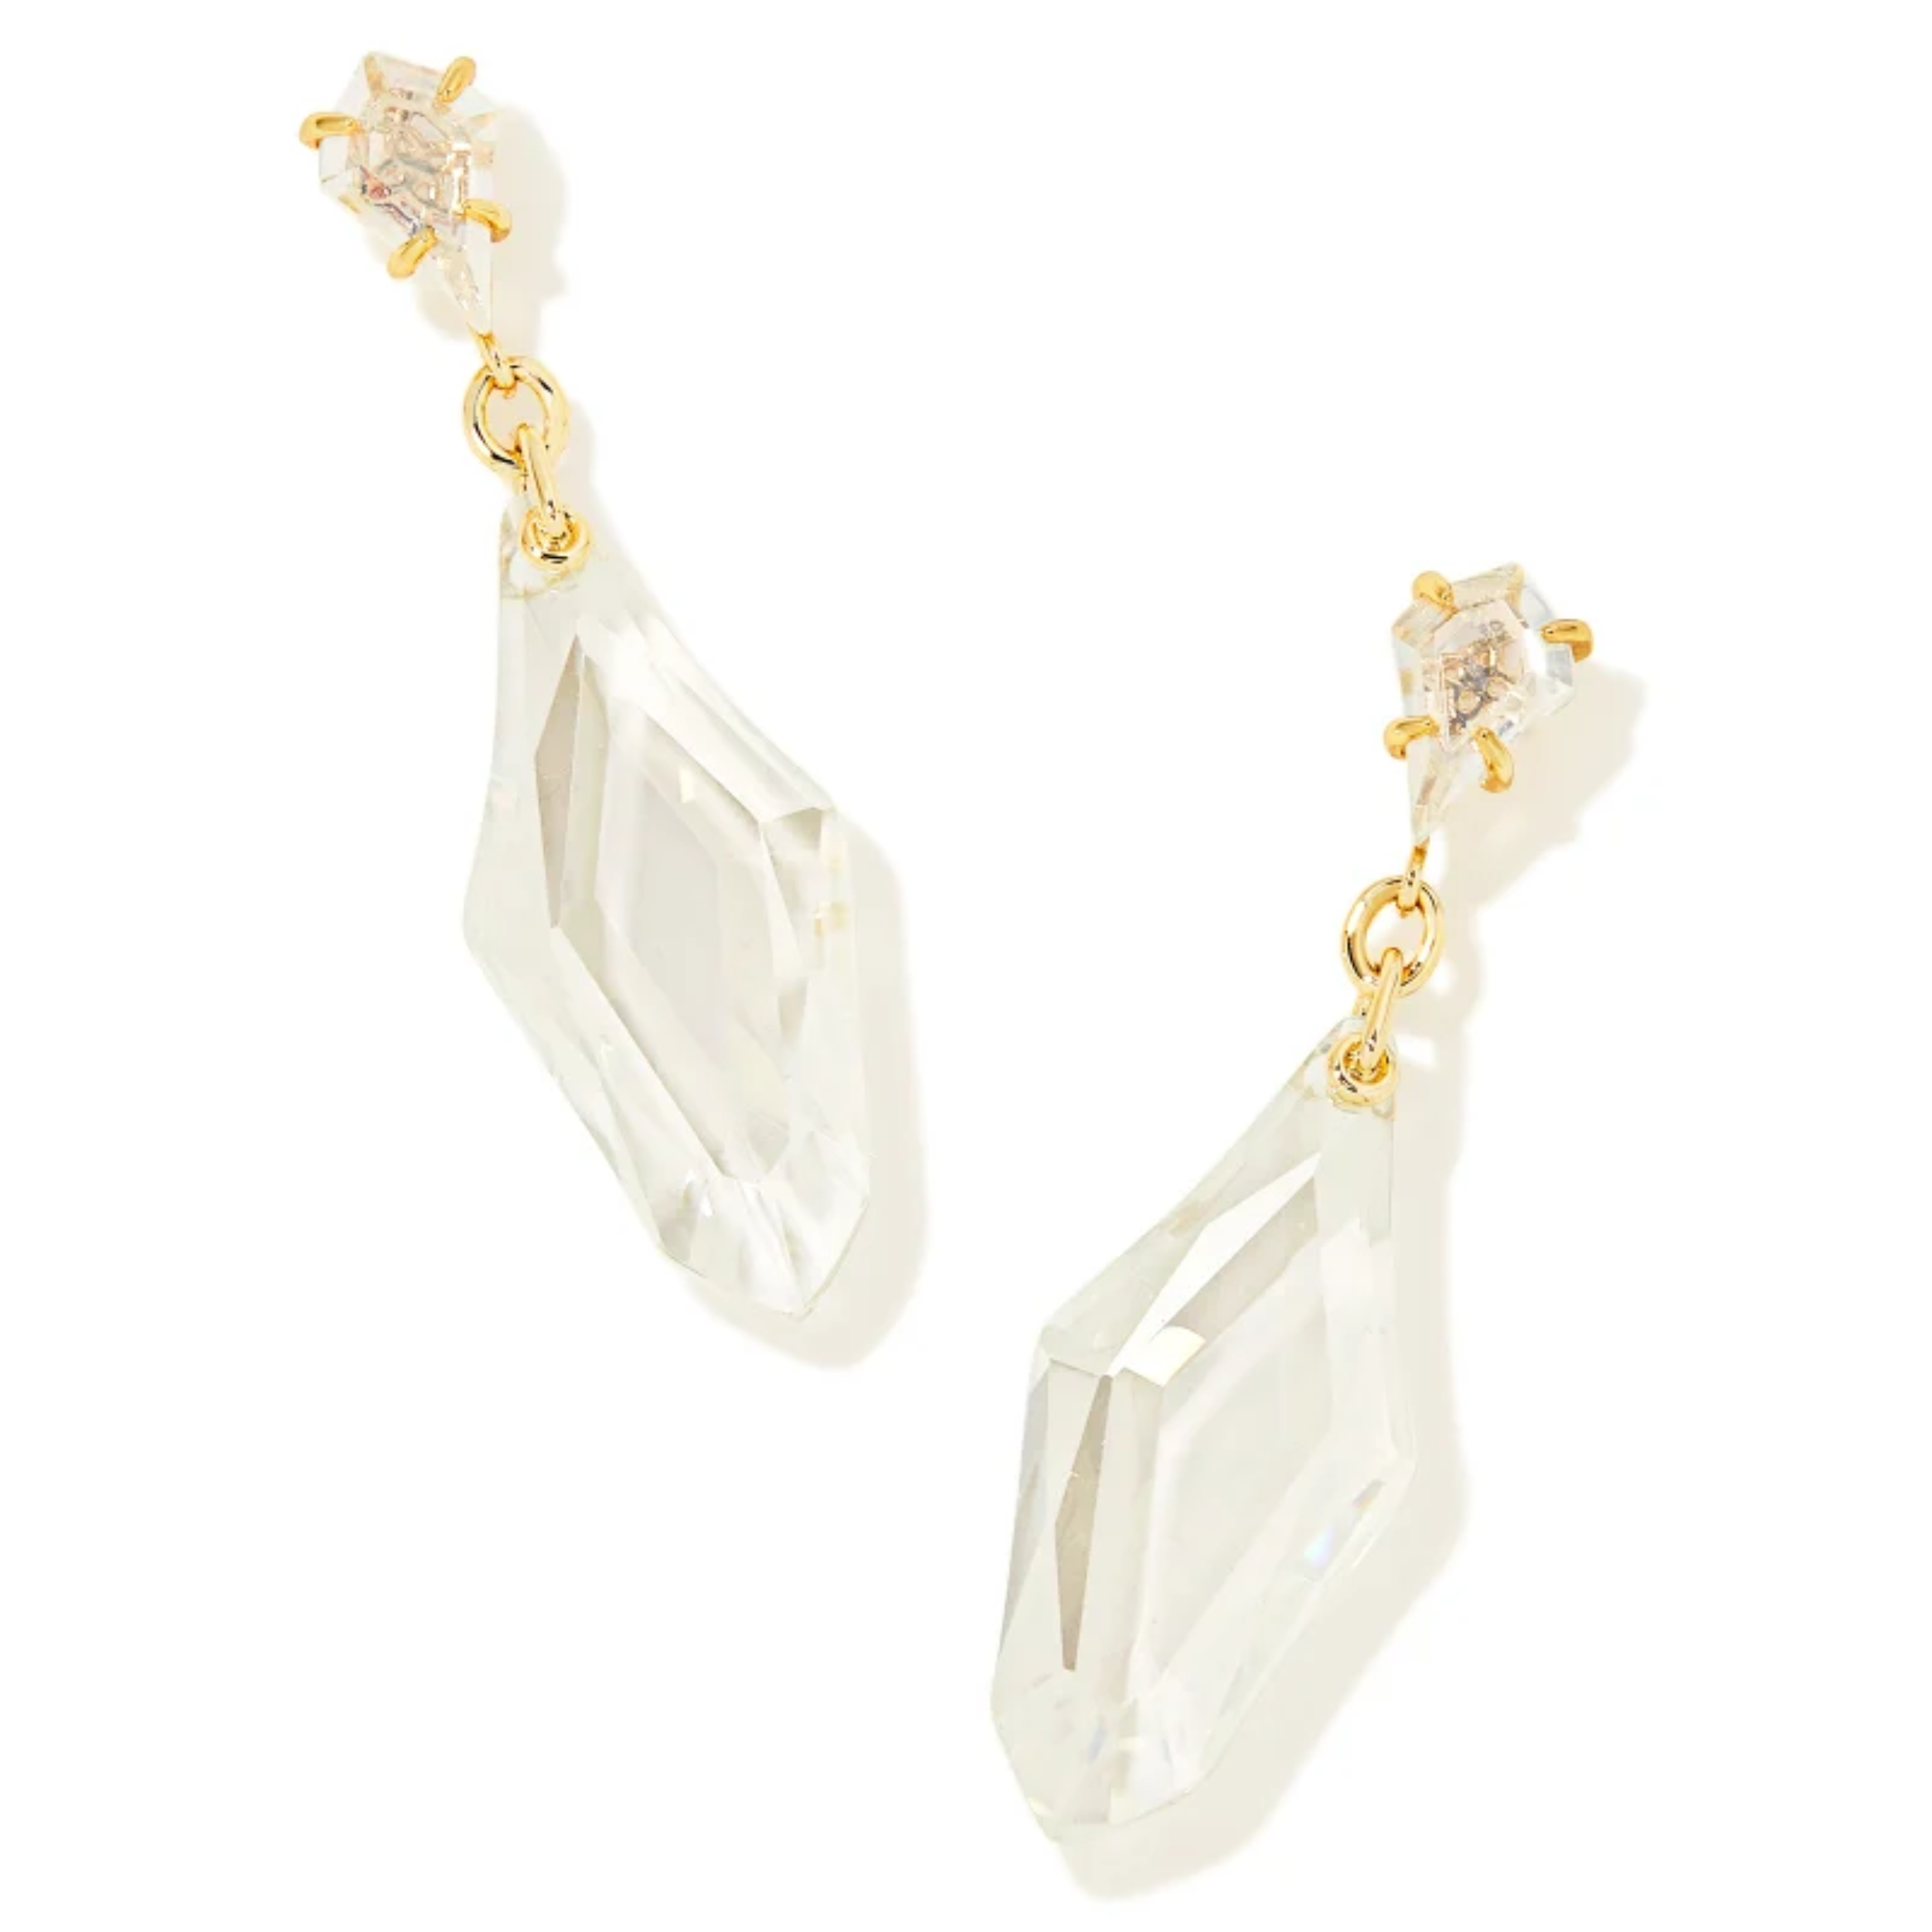 These Alexandria Statement Earrings in Gold Lustre Clear Glass are pictured on a white background.